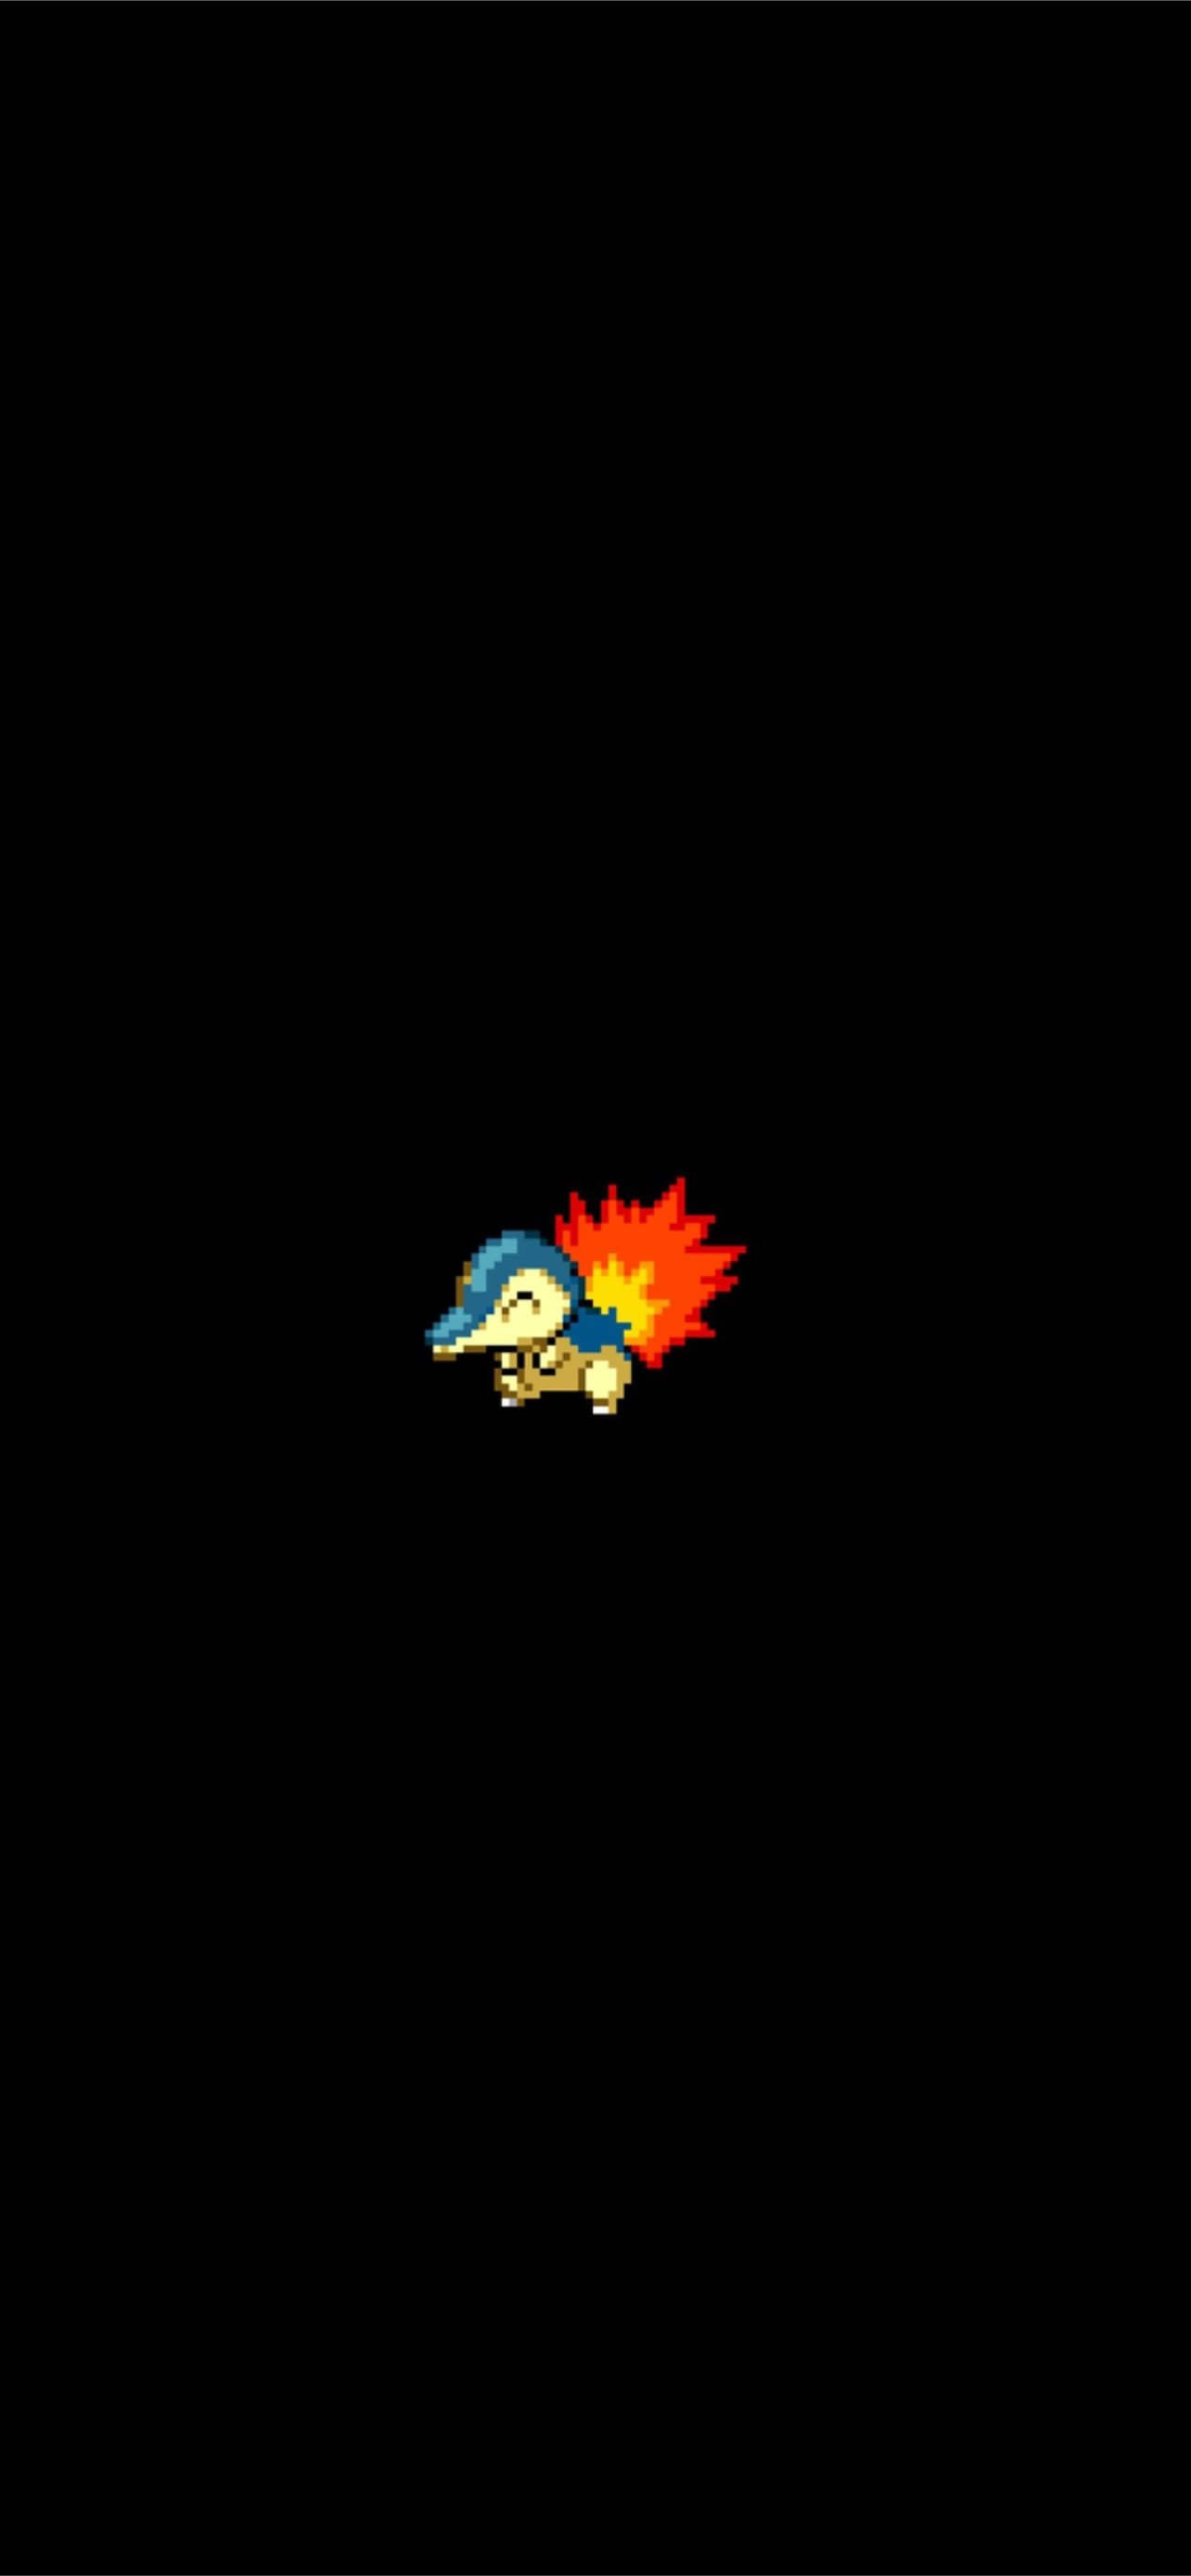 40 Cyndaquil Pokémon HD Wallpapers and Backgrounds